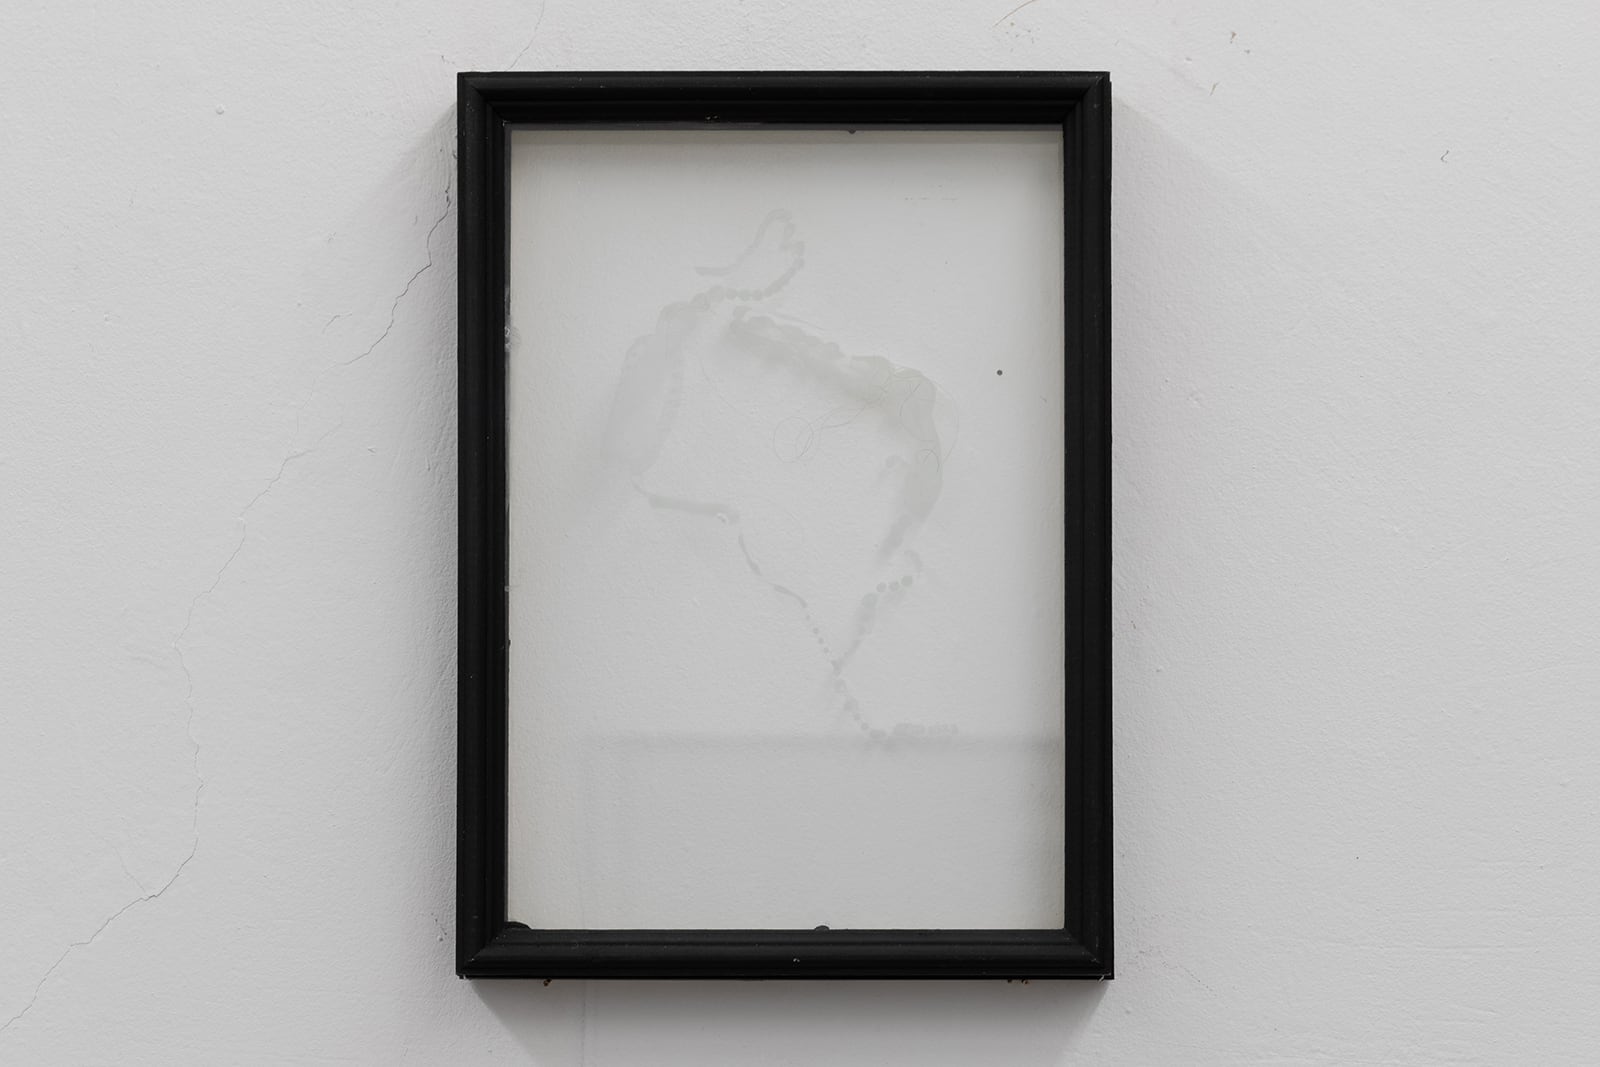 Vadim Murin, Untitled, 2019, artist frame with glass, stained glass acrylic, 21 x 29 cm